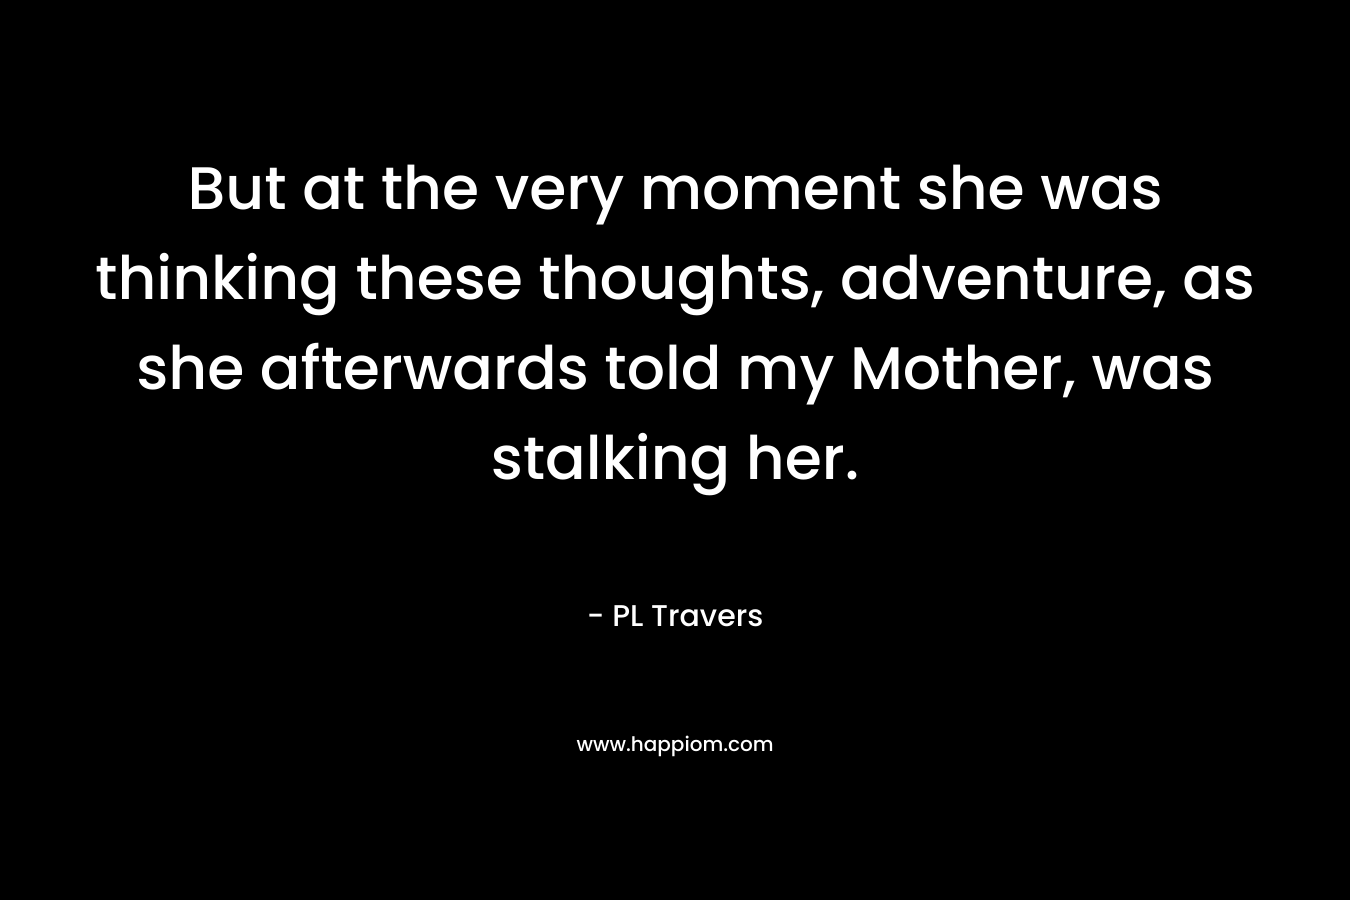 But at the very moment she was thinking these thoughts, adventure, as she afterwards told my Mother, was stalking her.